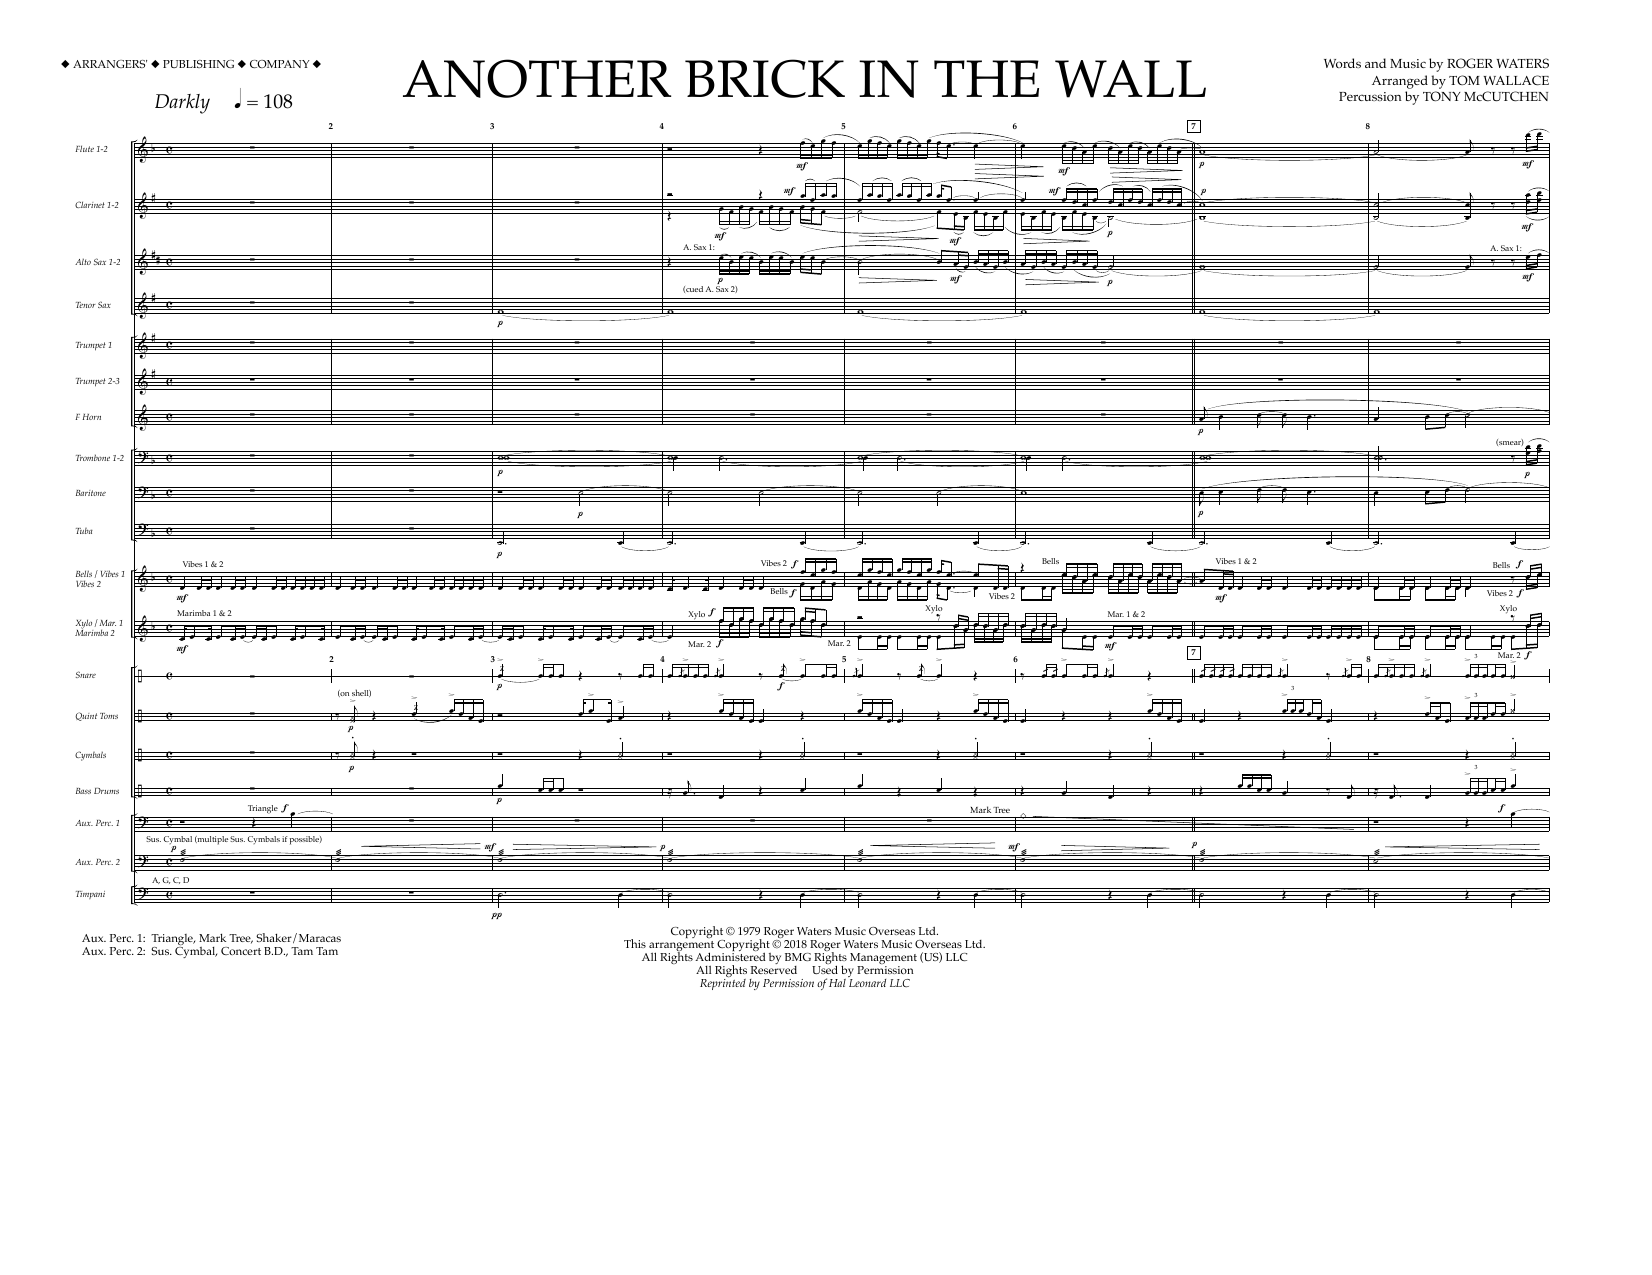 Download Tom Wallace Another Brick in the Wall - Full Score Sheet Music